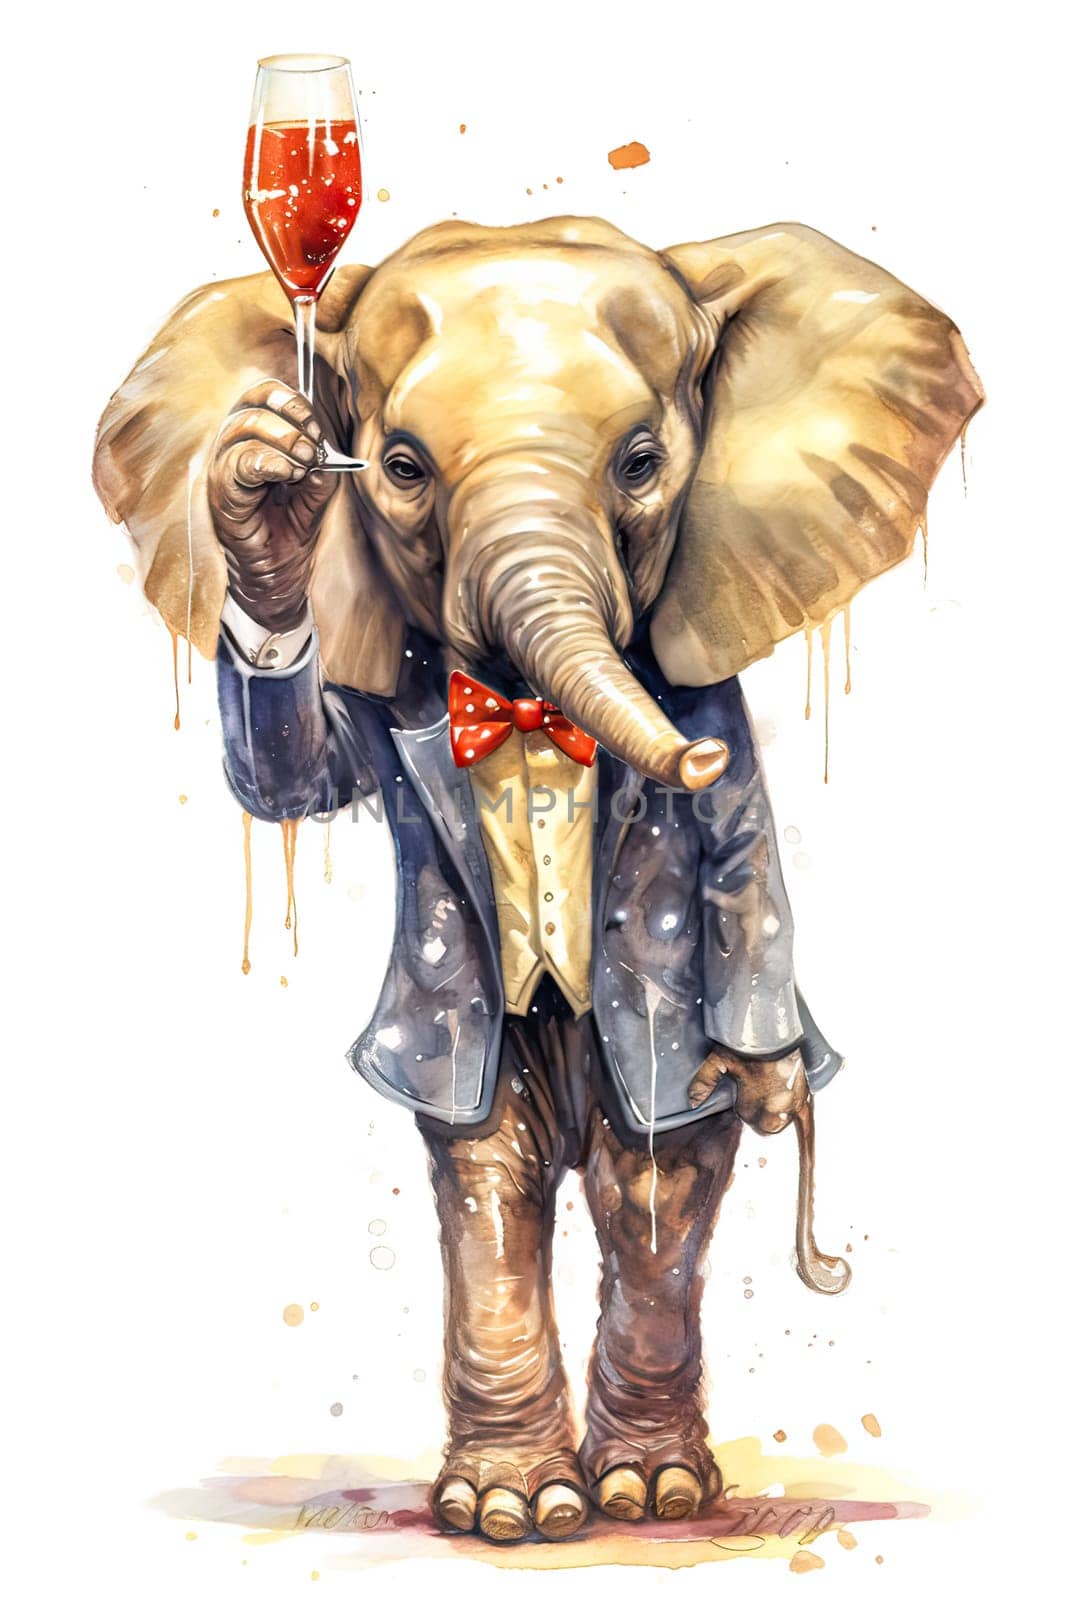 Celebrate in style with this whimsical watercolor elephant raising a toast with a glass of alcohol. Perfect for festive greeting cards and invitations